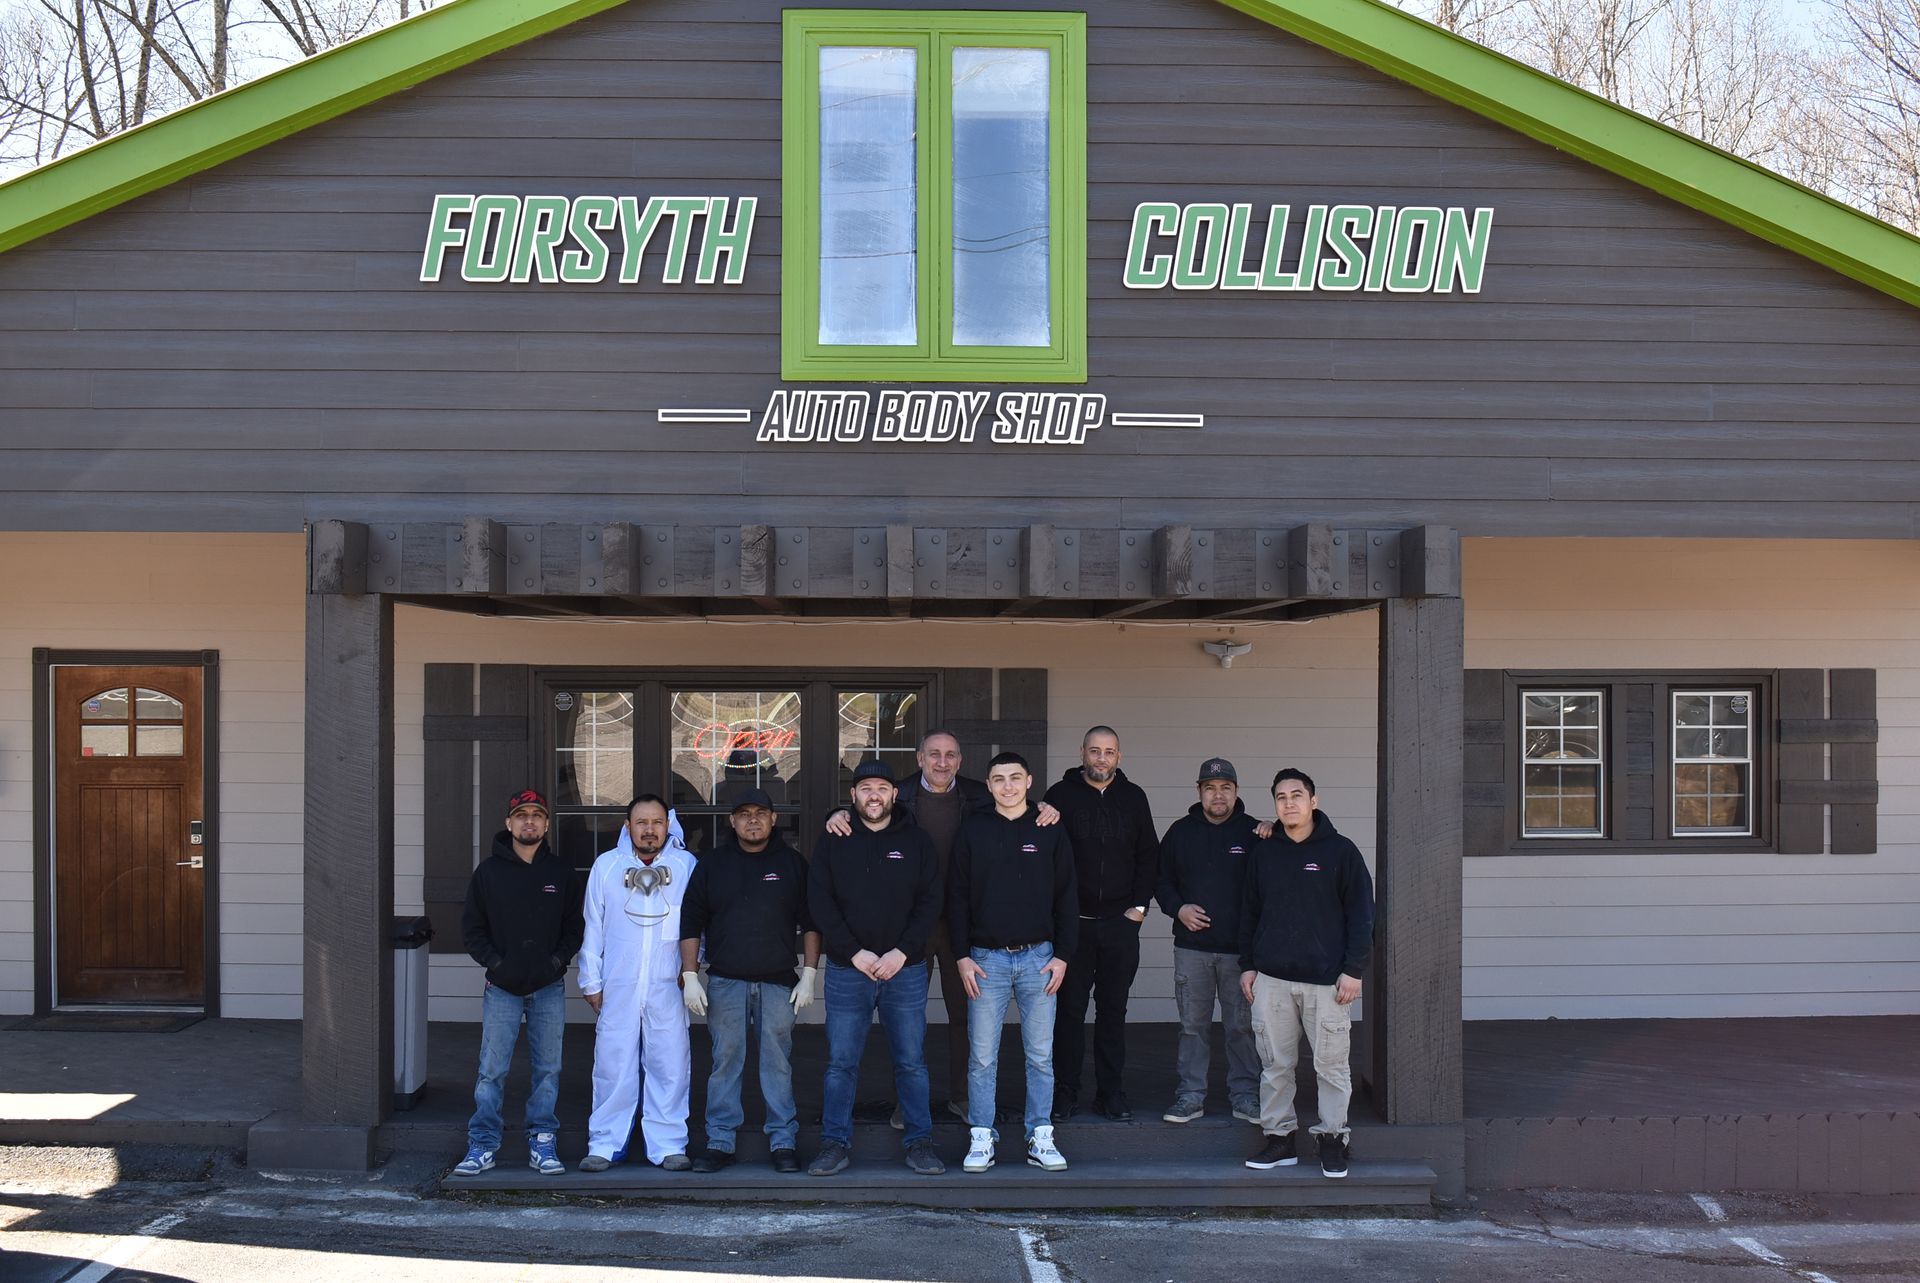 a group of people standing in front of a building that says forsyth collision